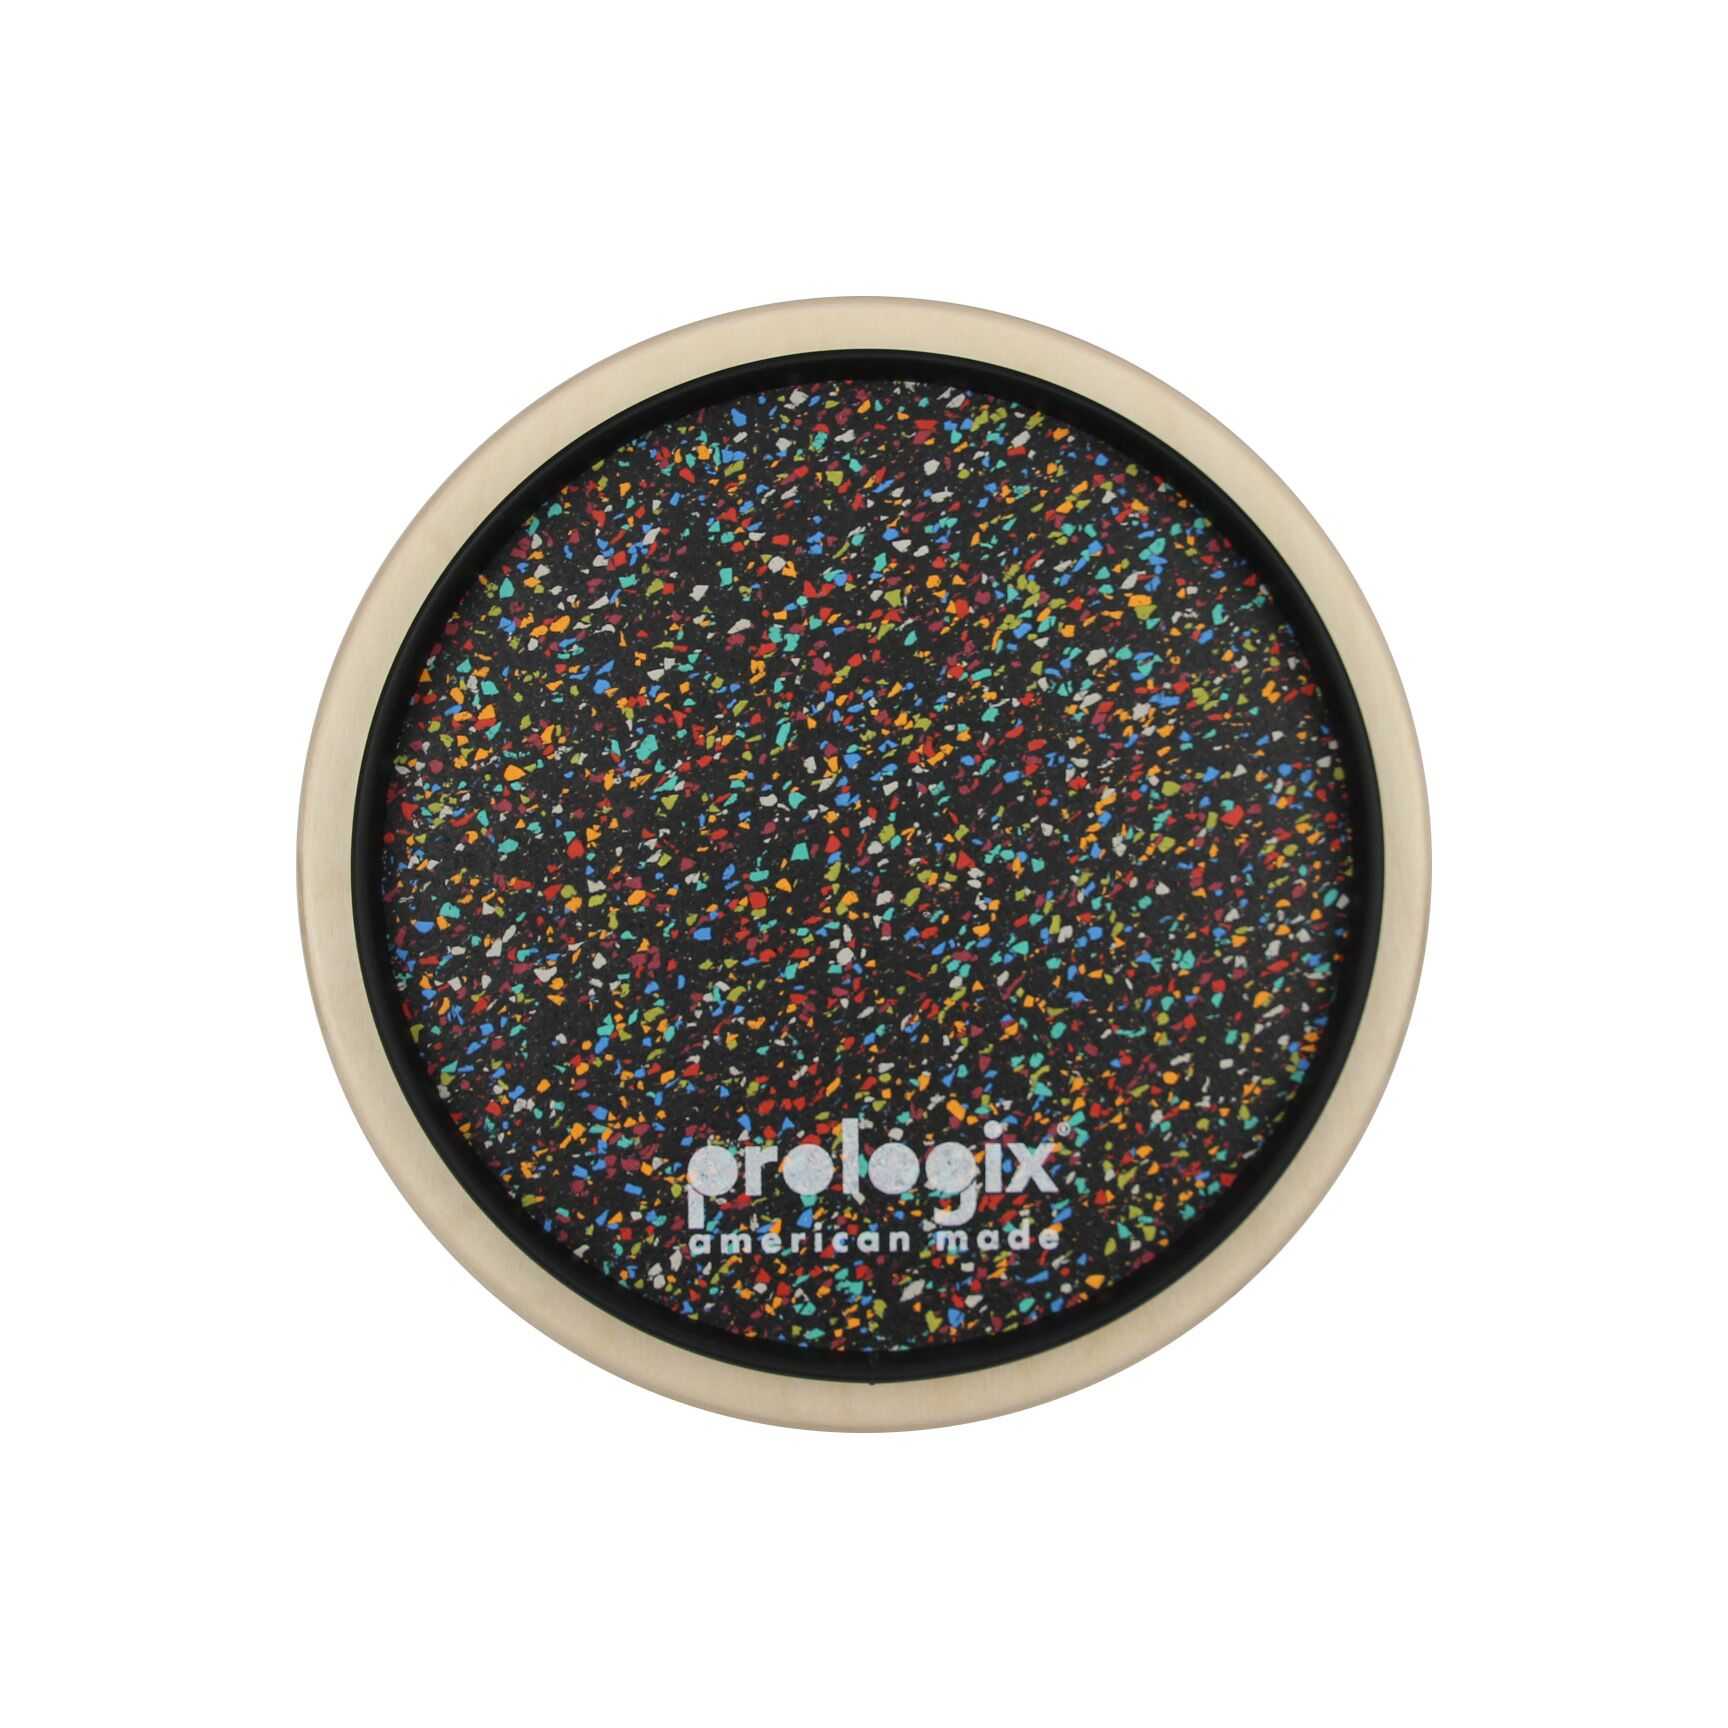 Prologix Vortex Marching Pad 8" with Rim Recycled Rubber Surface